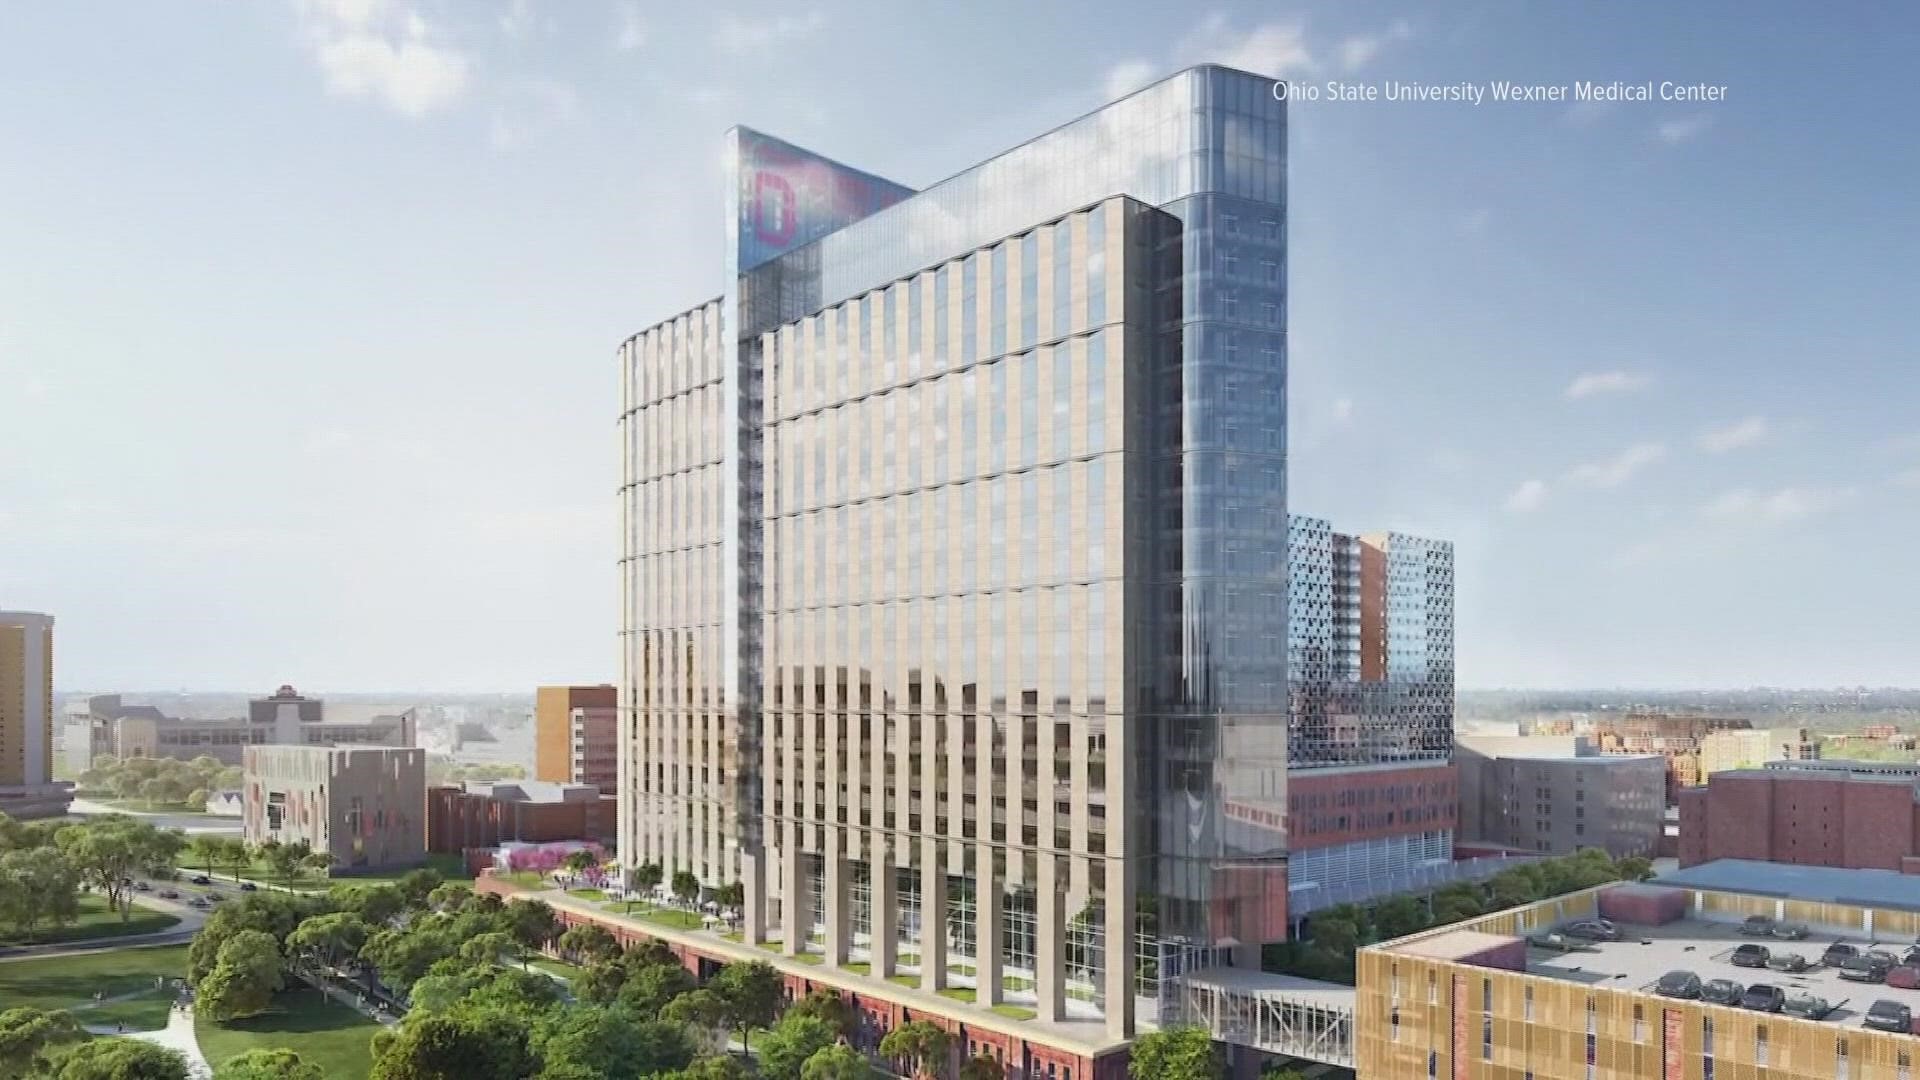 Co-leaders of The Ohio State University Wexner Medical Center inpatient hospital anticipate they will be able to meet the medical needs of central Ohio and beyond